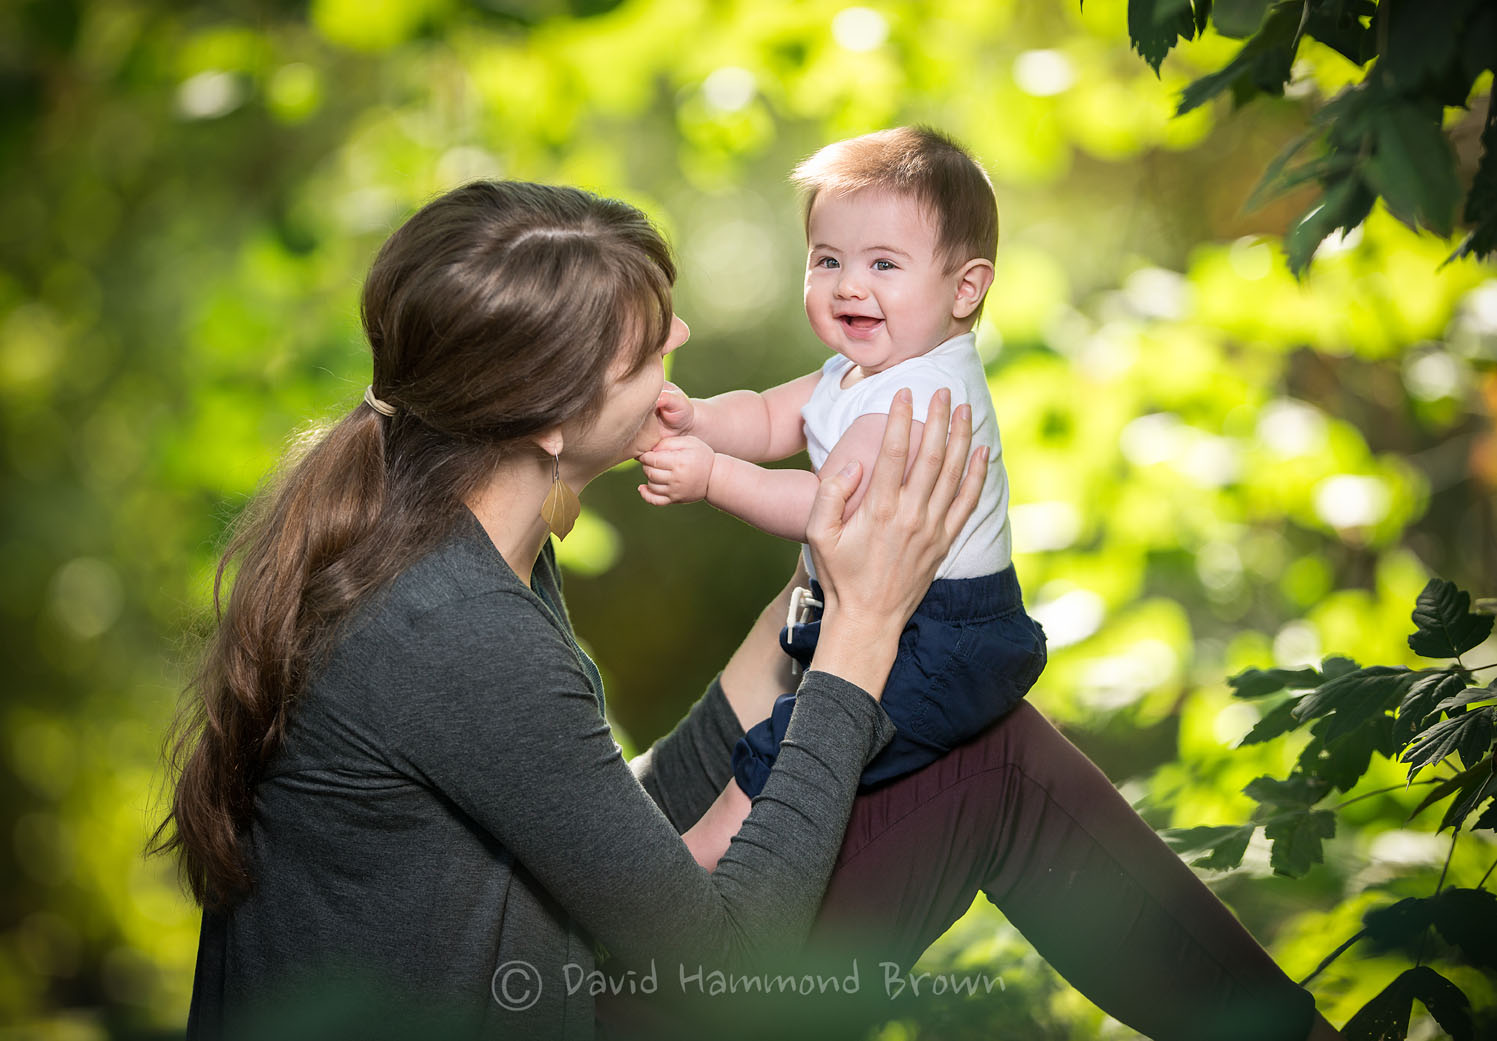 David Hammond Brown Photography - Mother and Baby